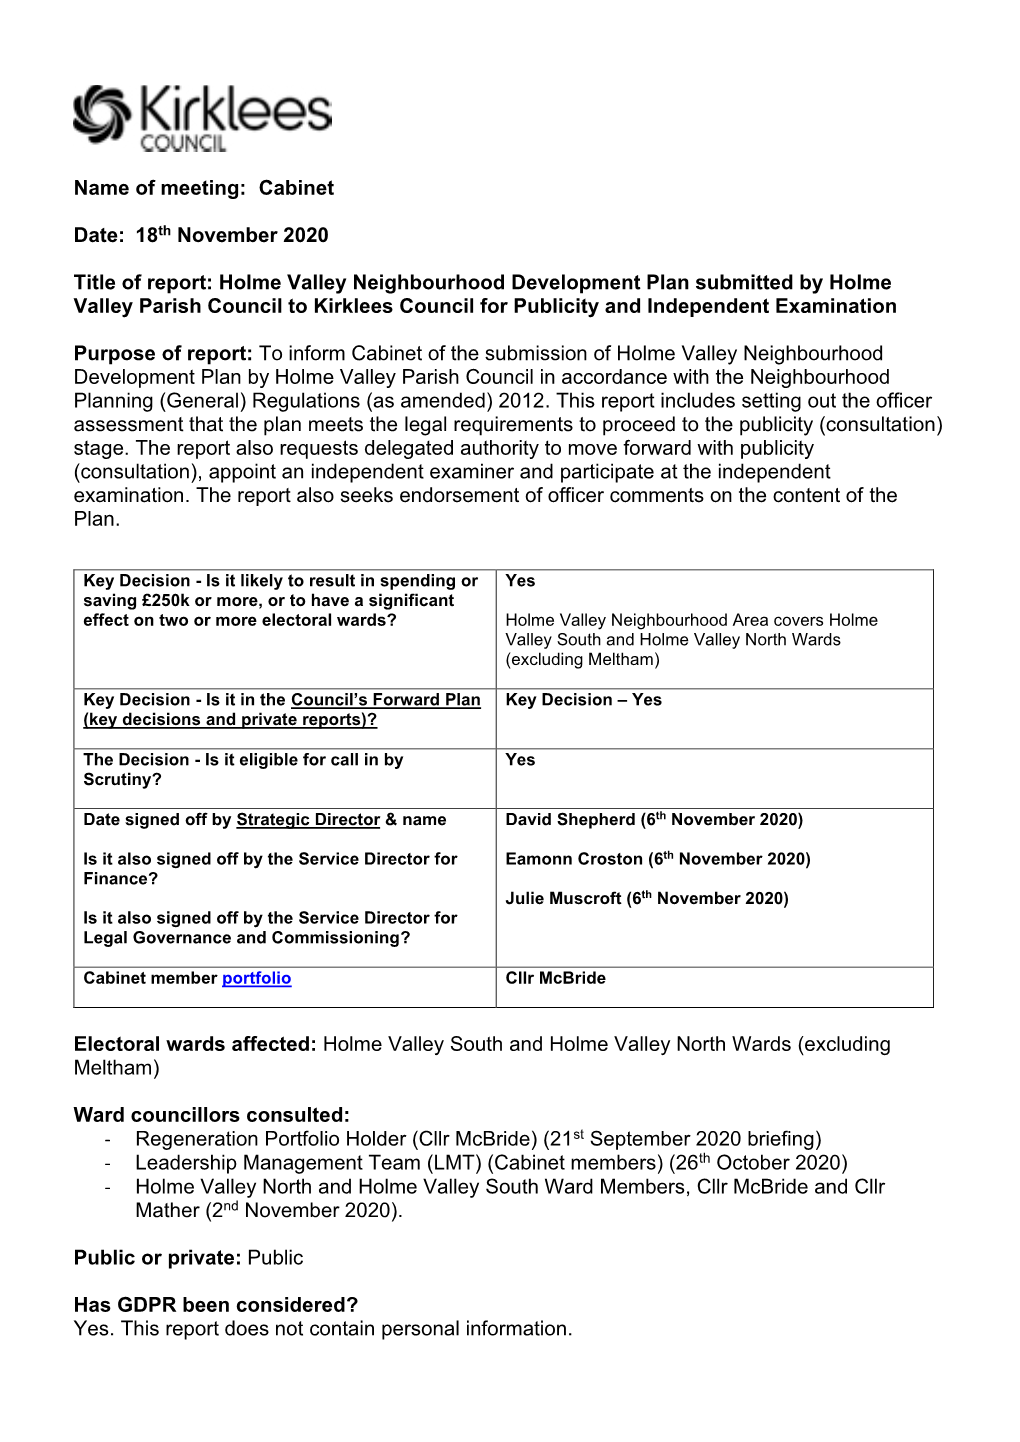 Name of Meeting: Cabinet Date: 18Th November 2020 Title of Report: Holme Valley Neighbourhood Development Plan Submitted by H